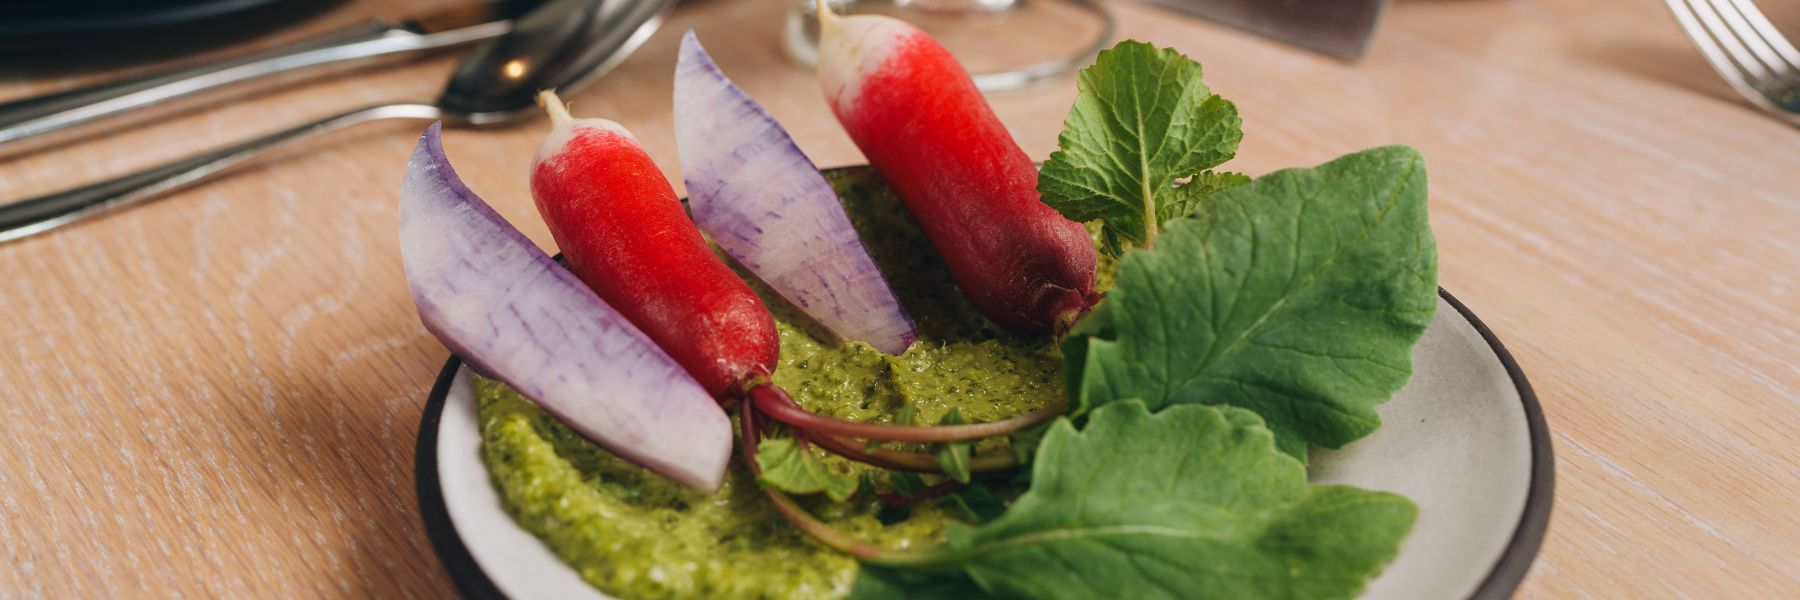 The vegetable top pesto at Vicia is served with raw, unadorned vegetables.